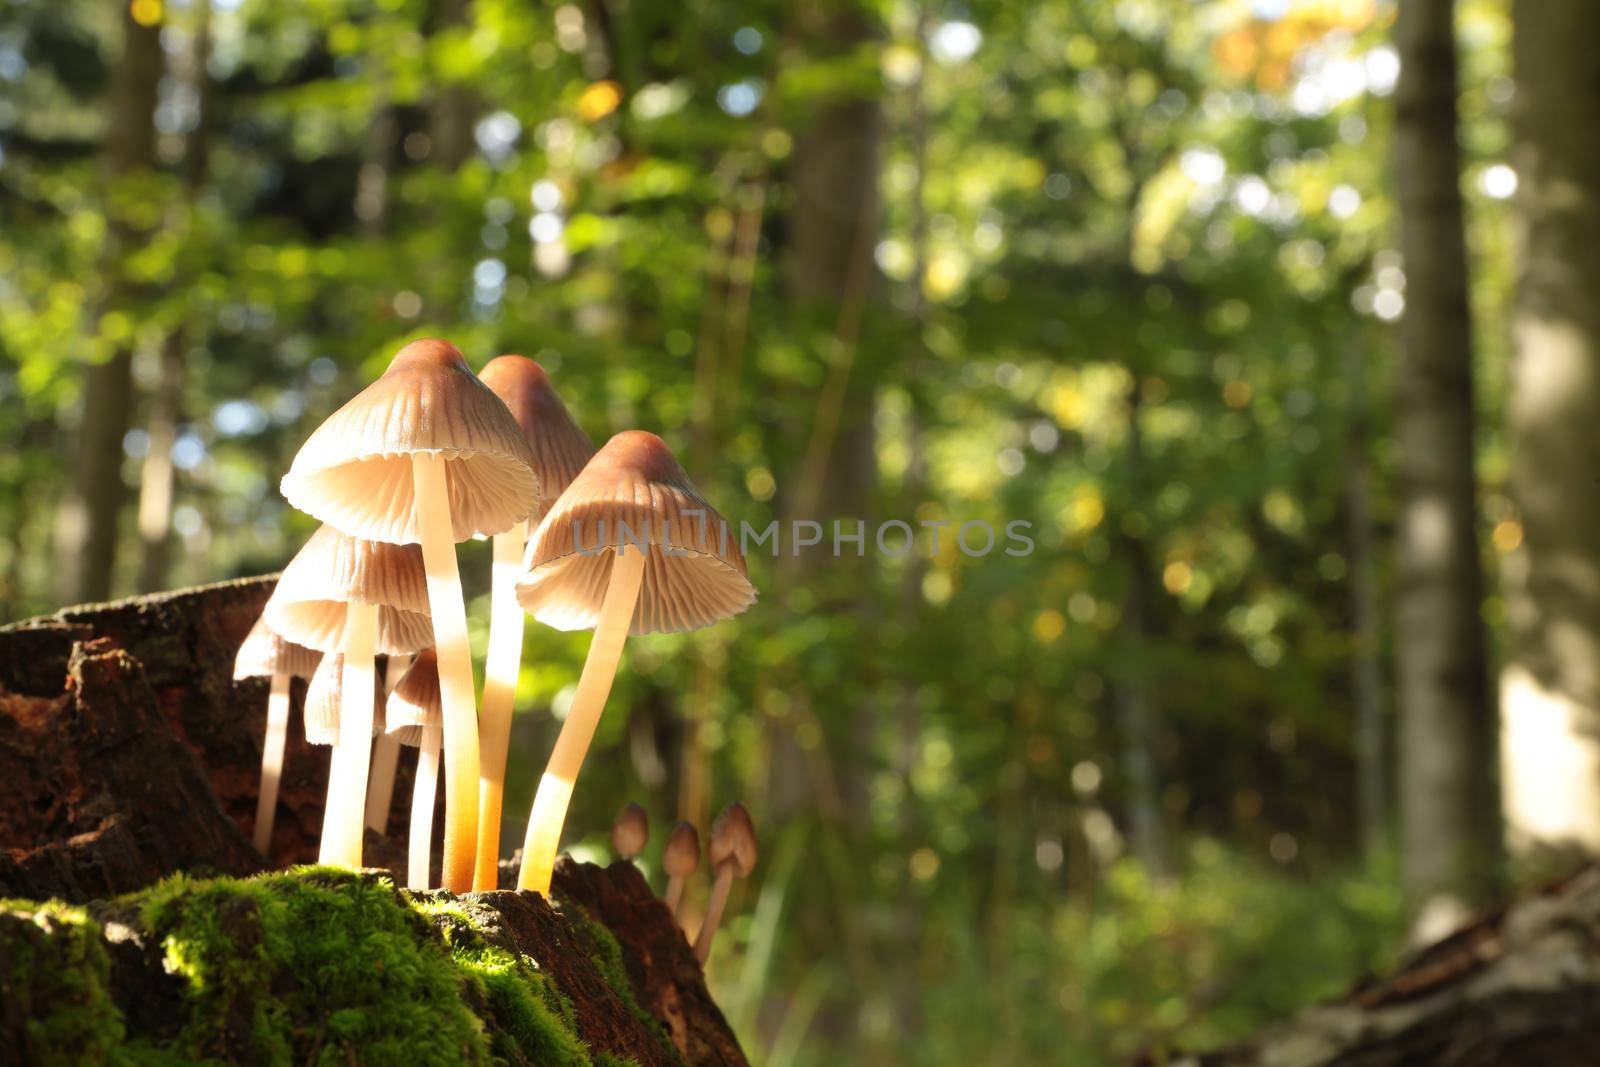 Family of mushrooms on a tree trunk.